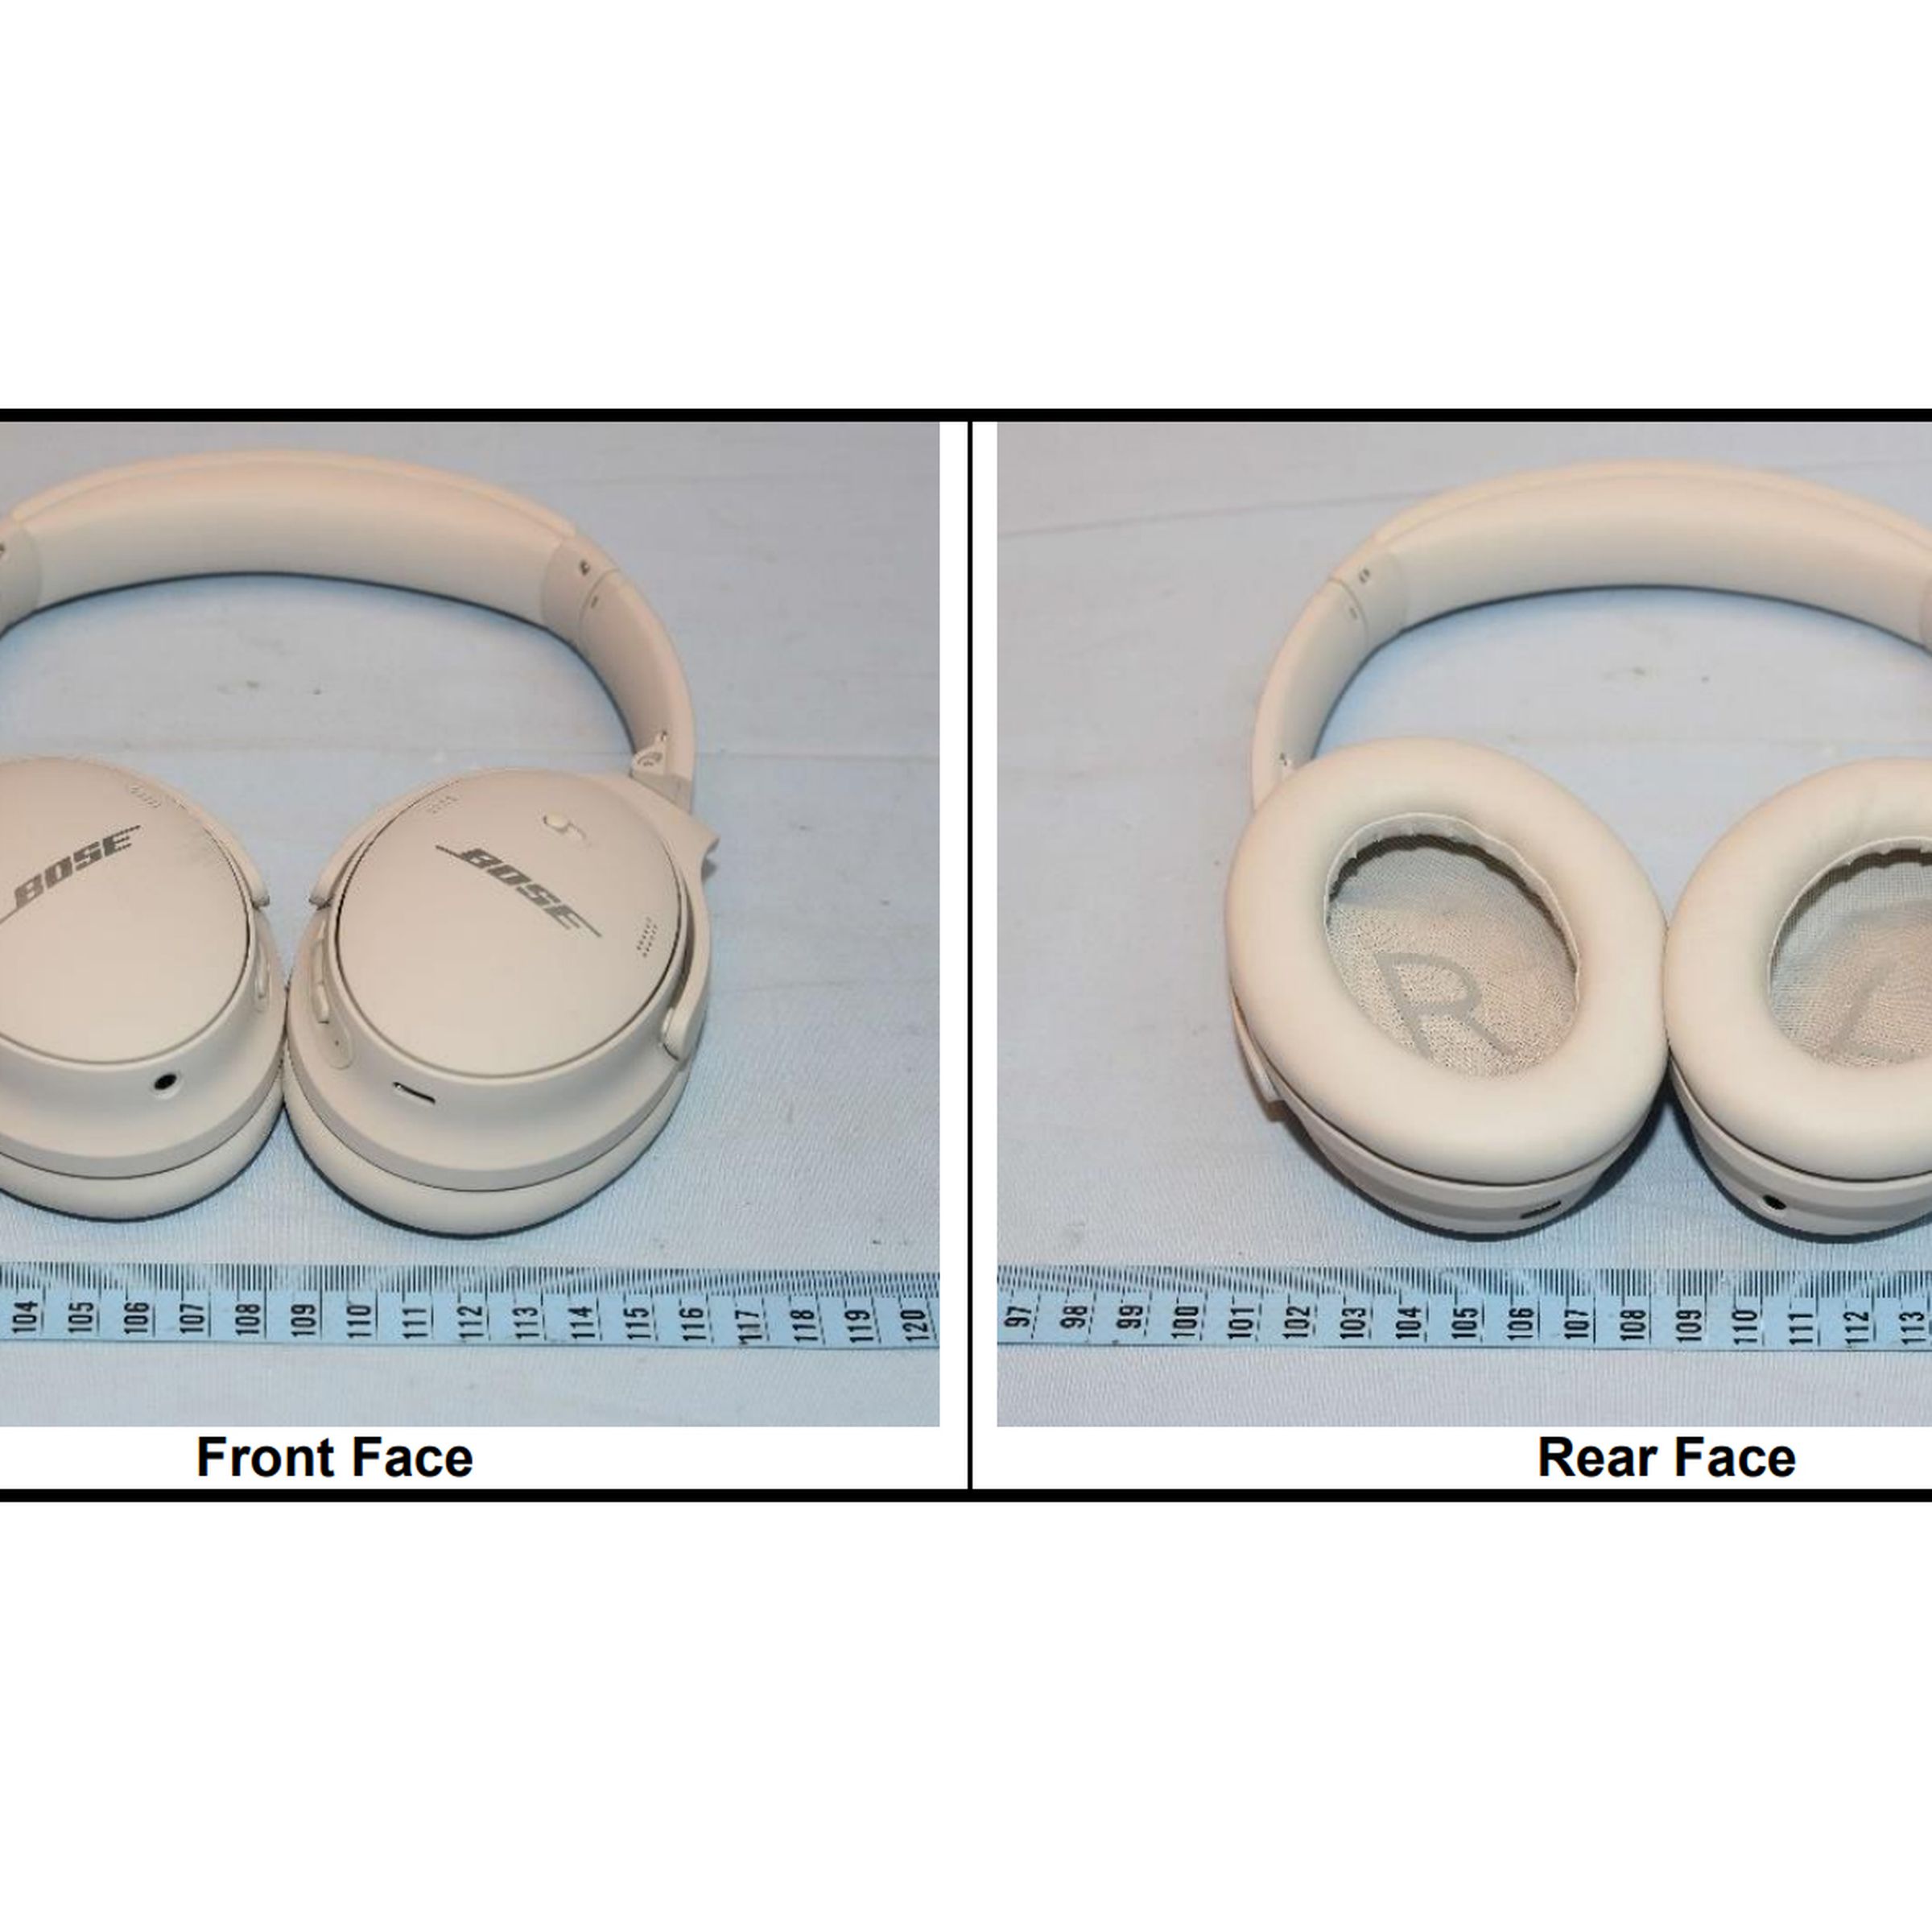 Images show a very similar pair of headphones to Bose’s existing QC35s.